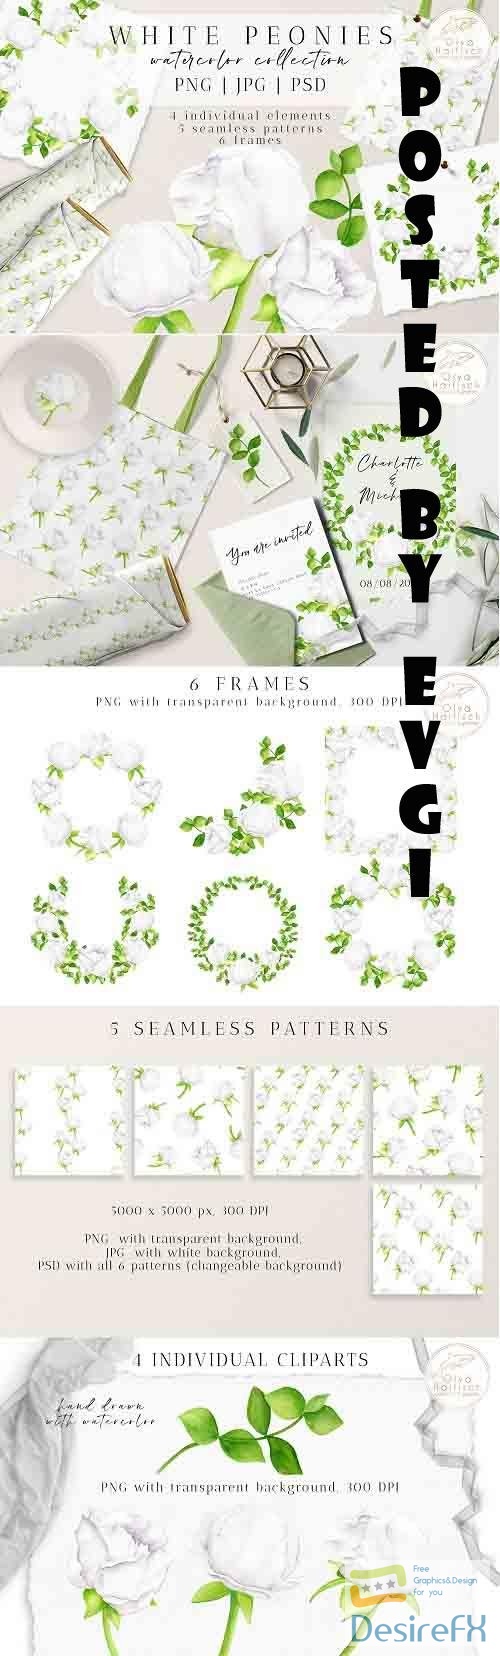 Watercolor Peony Flowers Clipart Collection. Floral Wreaths - 1336487